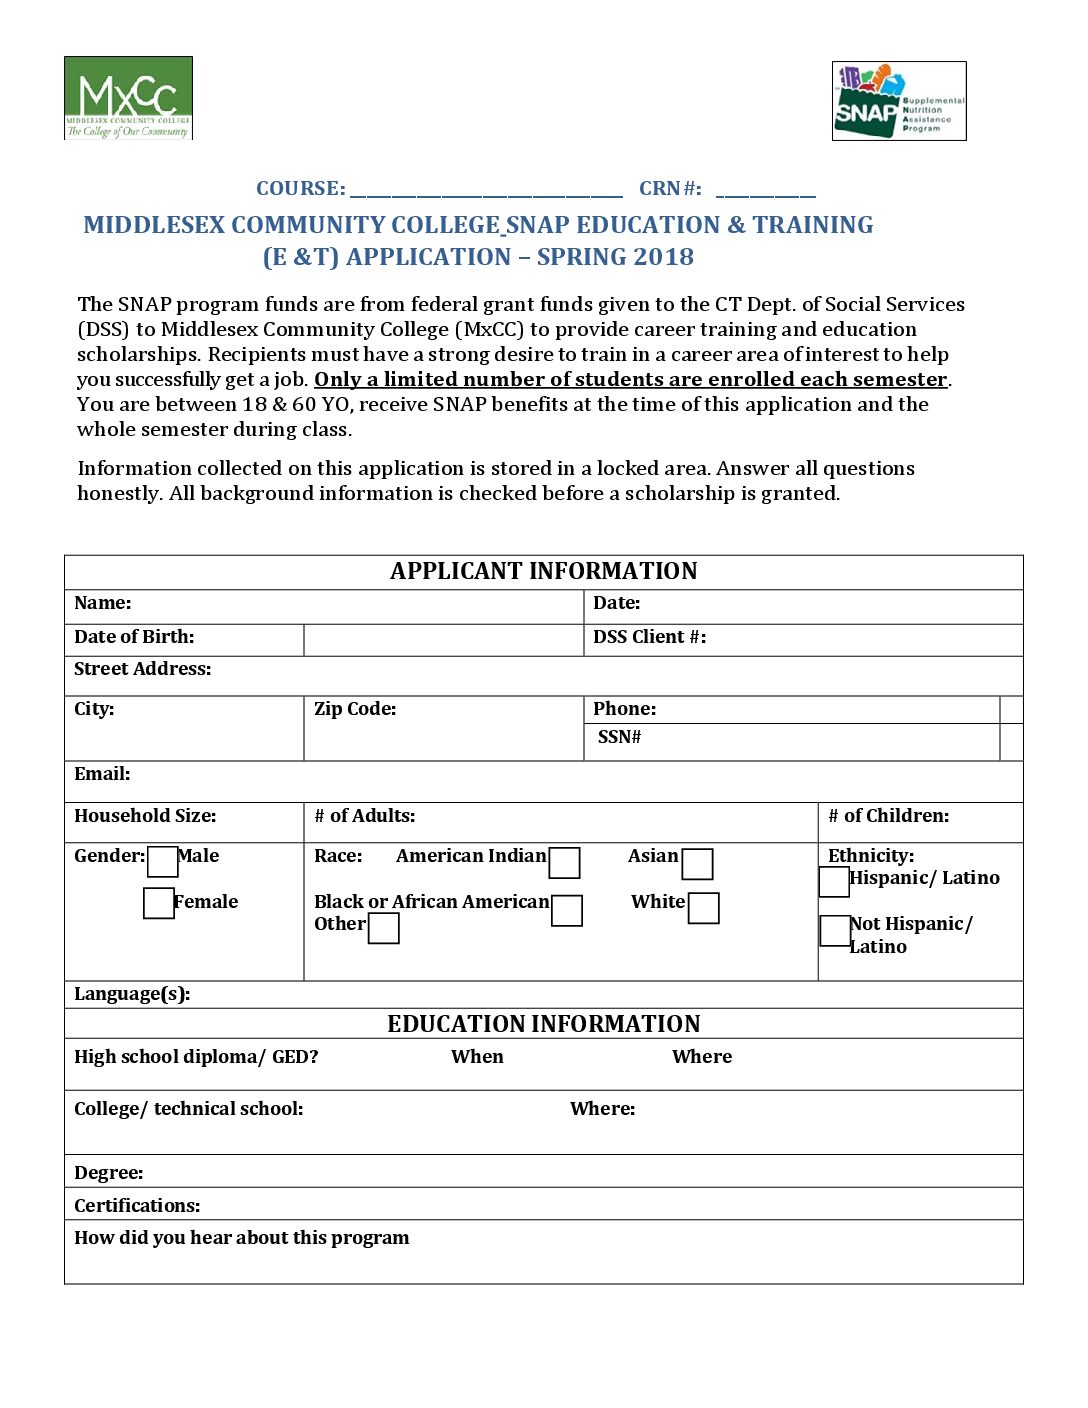 Download the SNAP application Middlesex Community College, CT